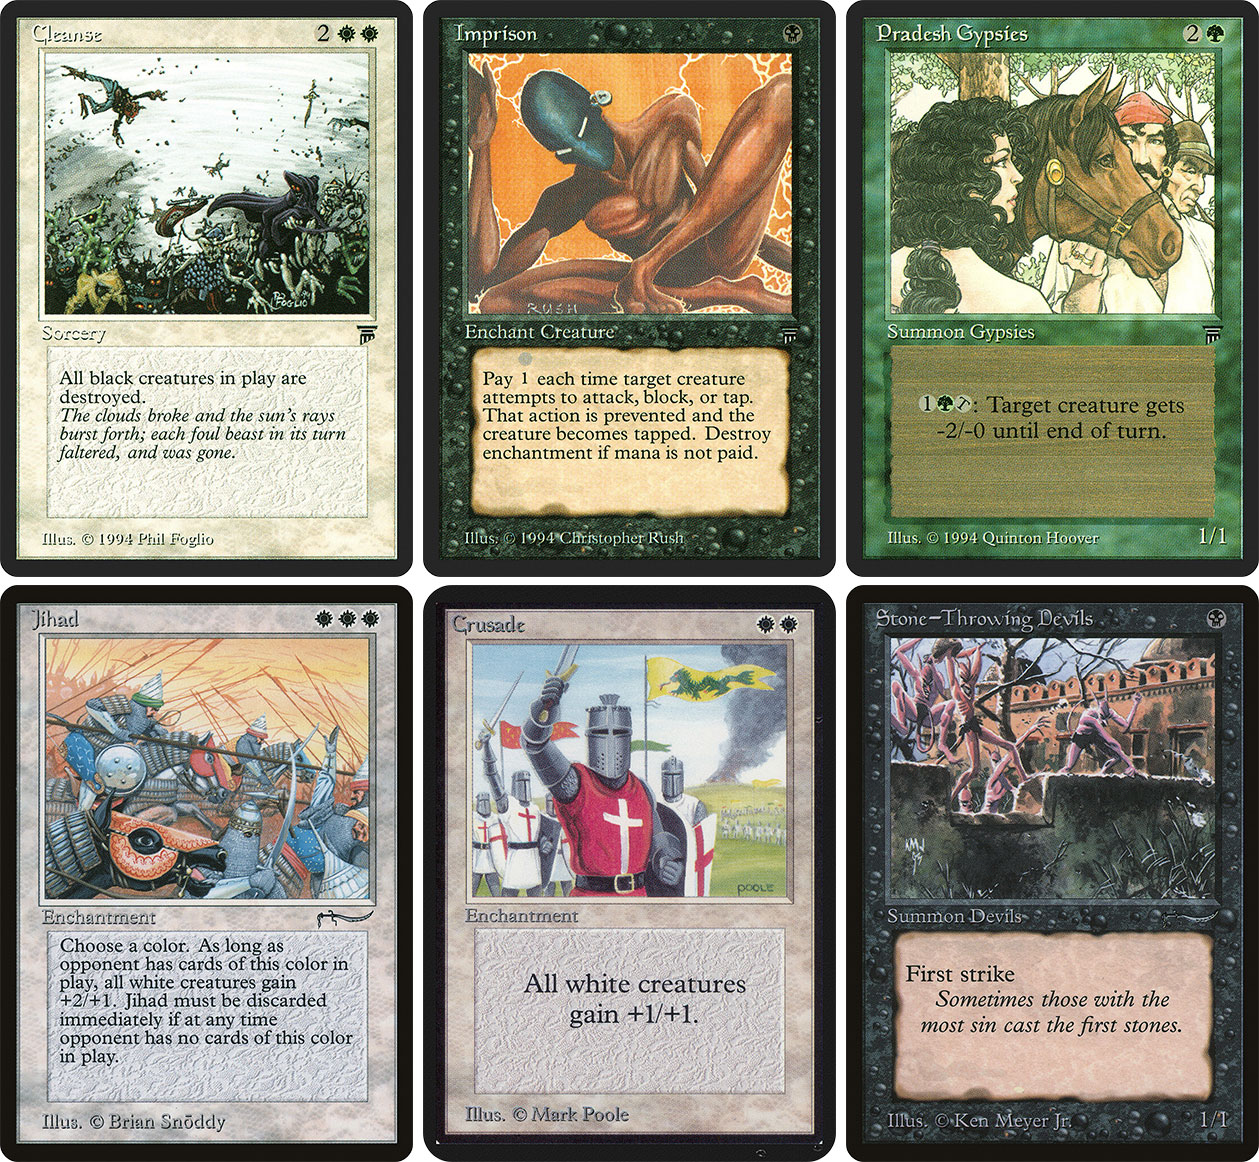 Wizards Bans 7 Cards With Racist Depictions Including Invoke